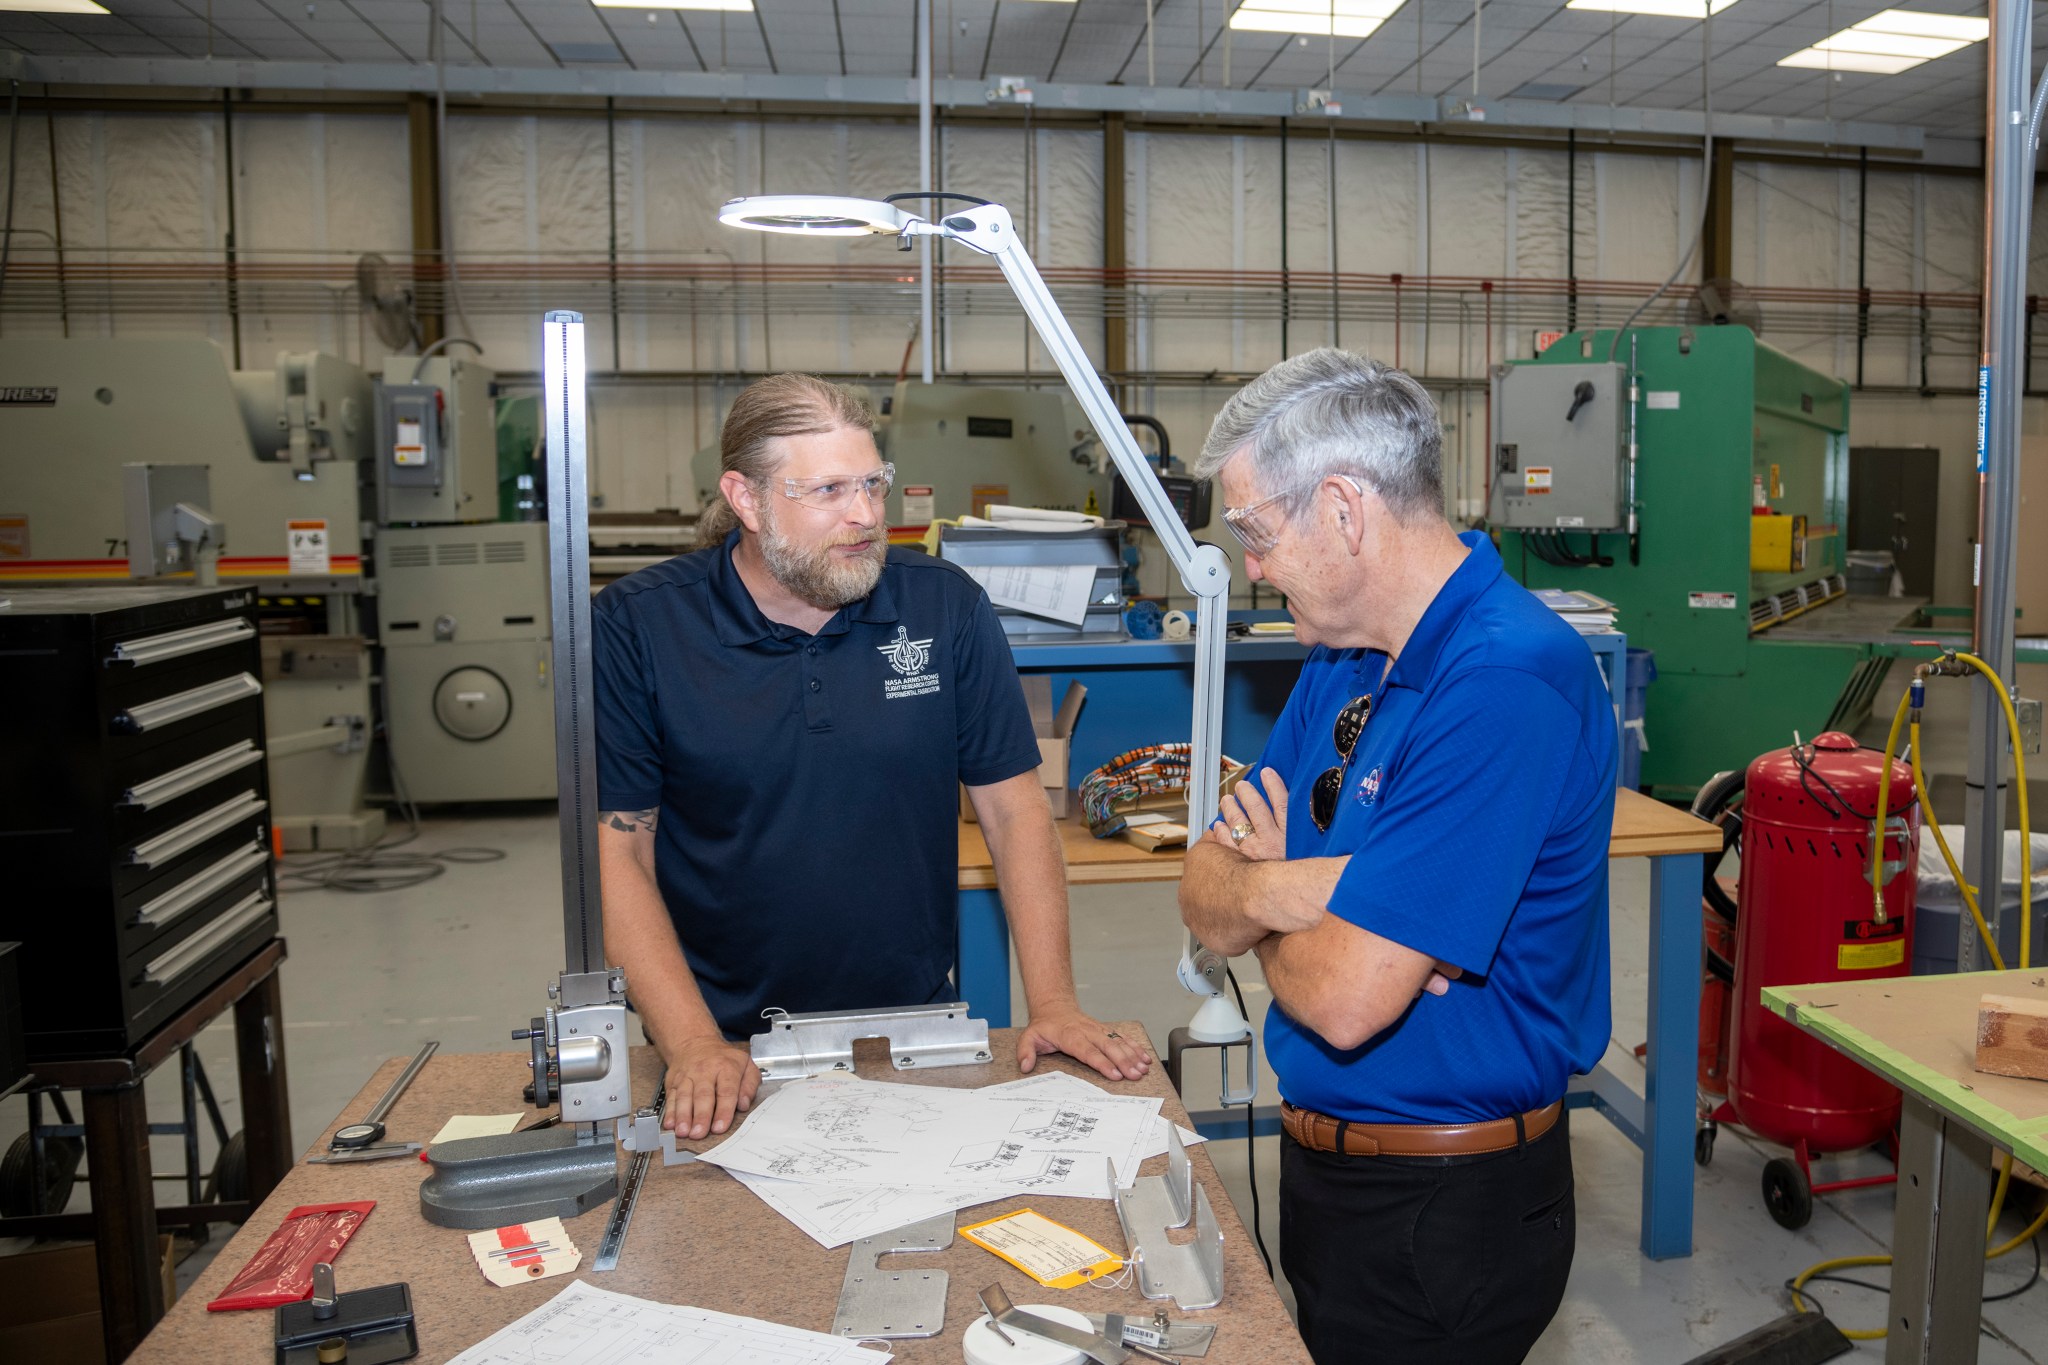 Jason Nelson, lead engineering technician at NASA’s Armstrong Flight Research Center Fabrication Branch